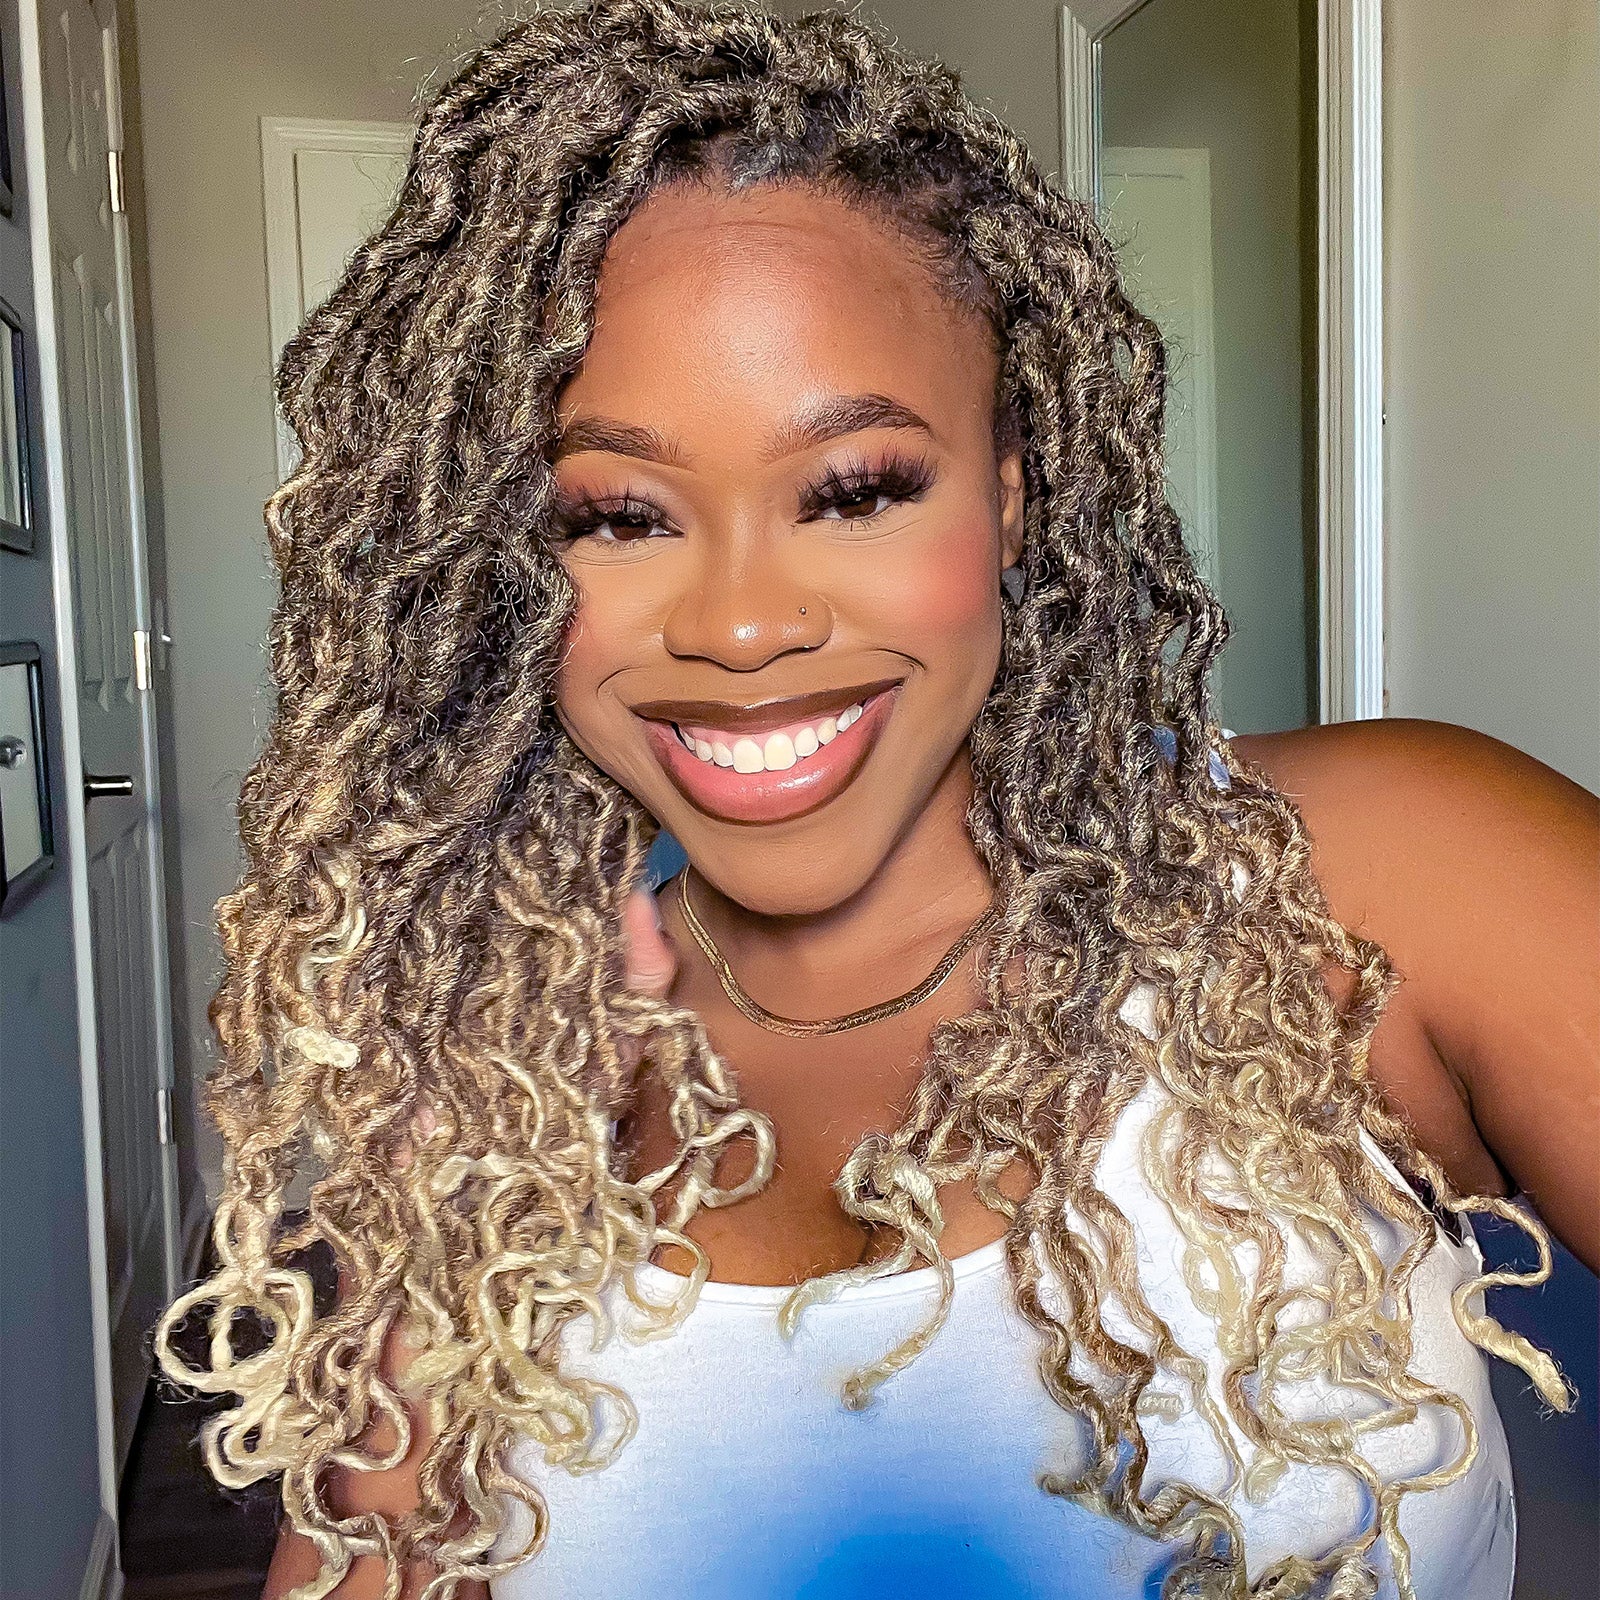 ToyoTress Toceana Curly Locs Crochet Hair - Pre-twisted Distressed Mermaid Crochet Braids Pre-looped Synthetic Braiding Hair Extensions